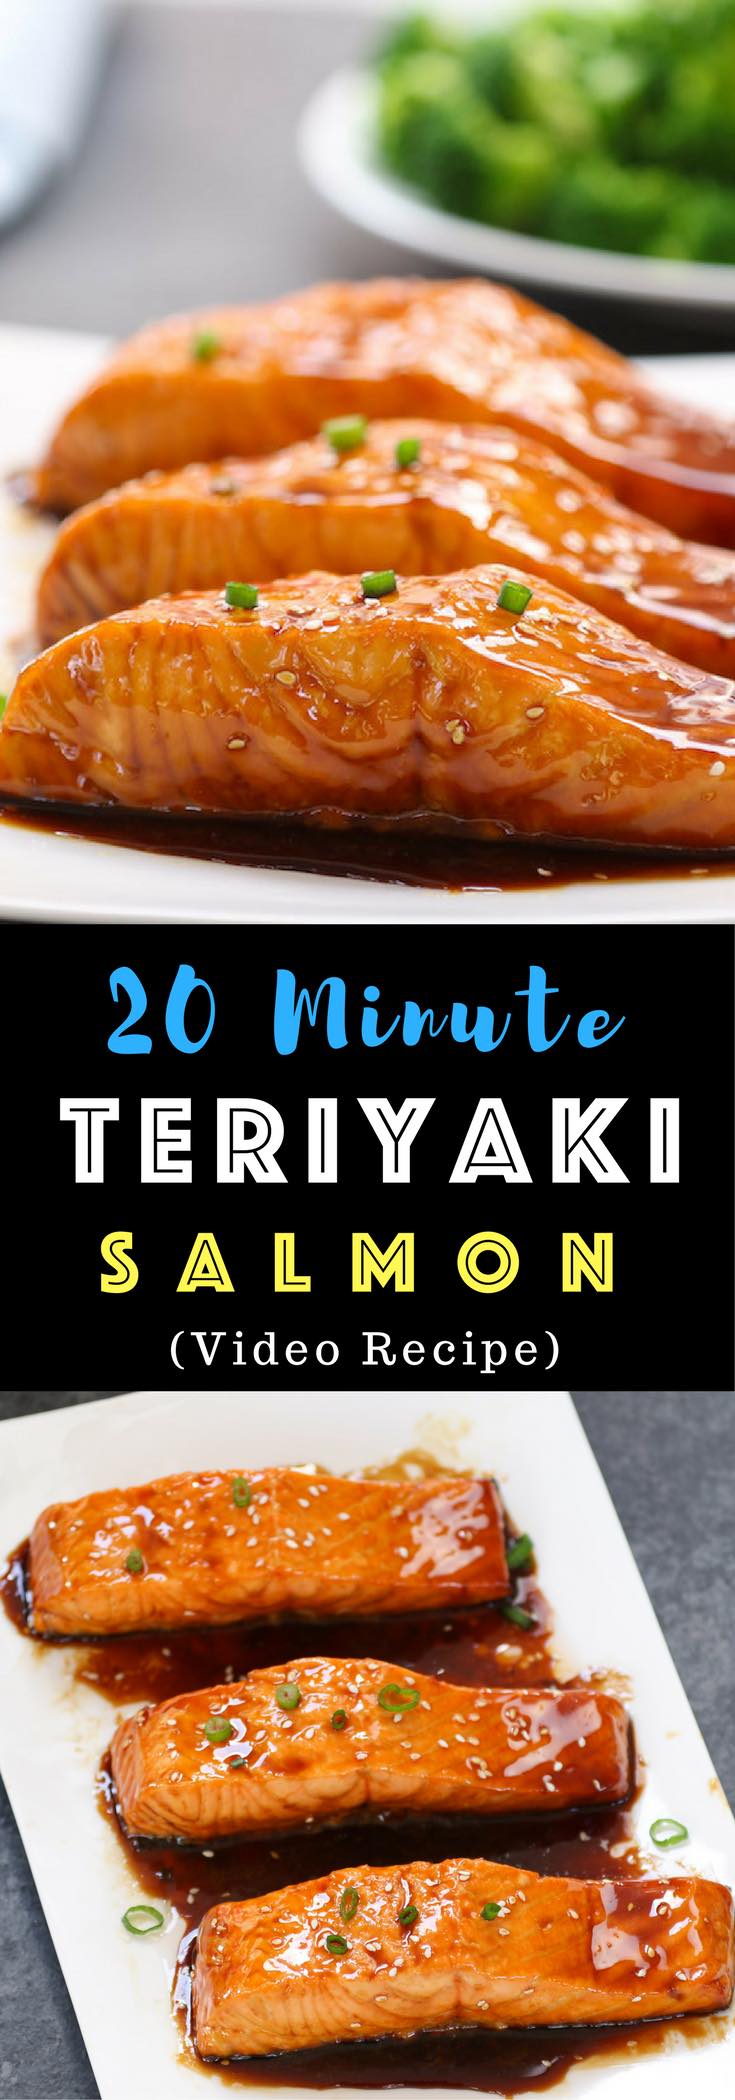 The easiest, most unbelievably delicious Teriyaki Salmon. And it’ll be on your dinner table in just 20 minutes. All you need is only a few ingredients: salmon, soy sauce, mirin, white wine and sugar. One of the best Asian dinner ideas! Served with rice and broccoli. Quick and easy dinner recipe. Video recipe. | Tipbuzz.com